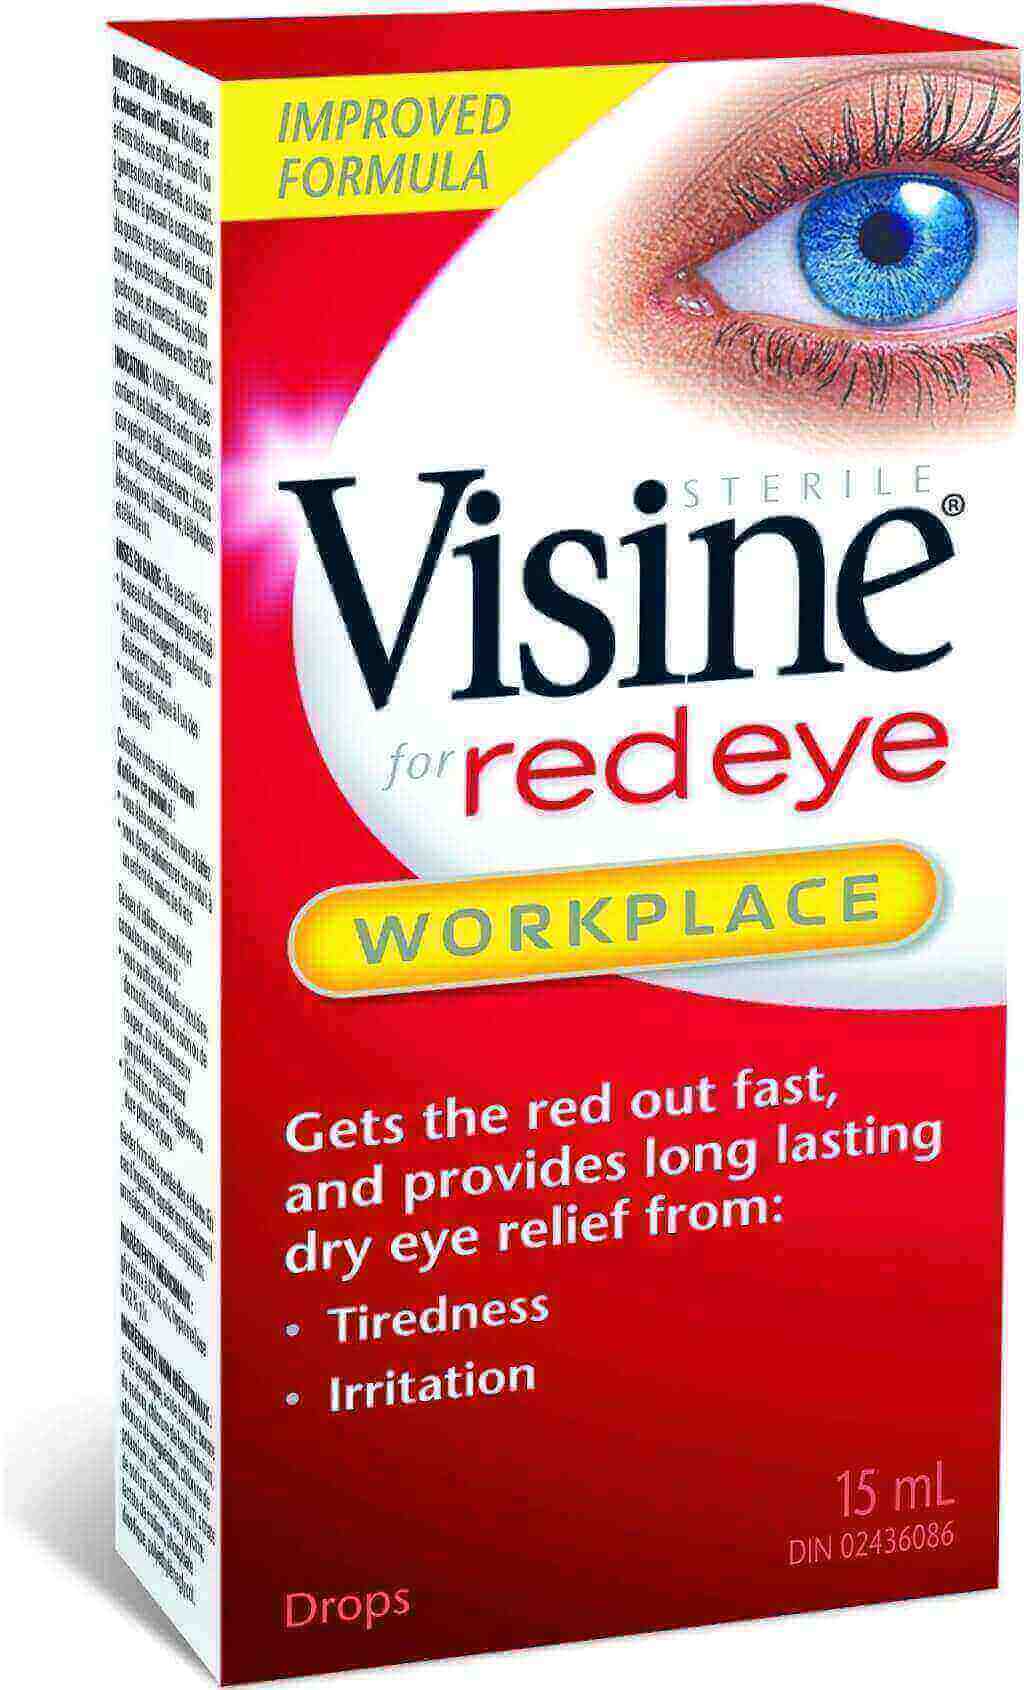 VISINE® for Red Eye – Workplace